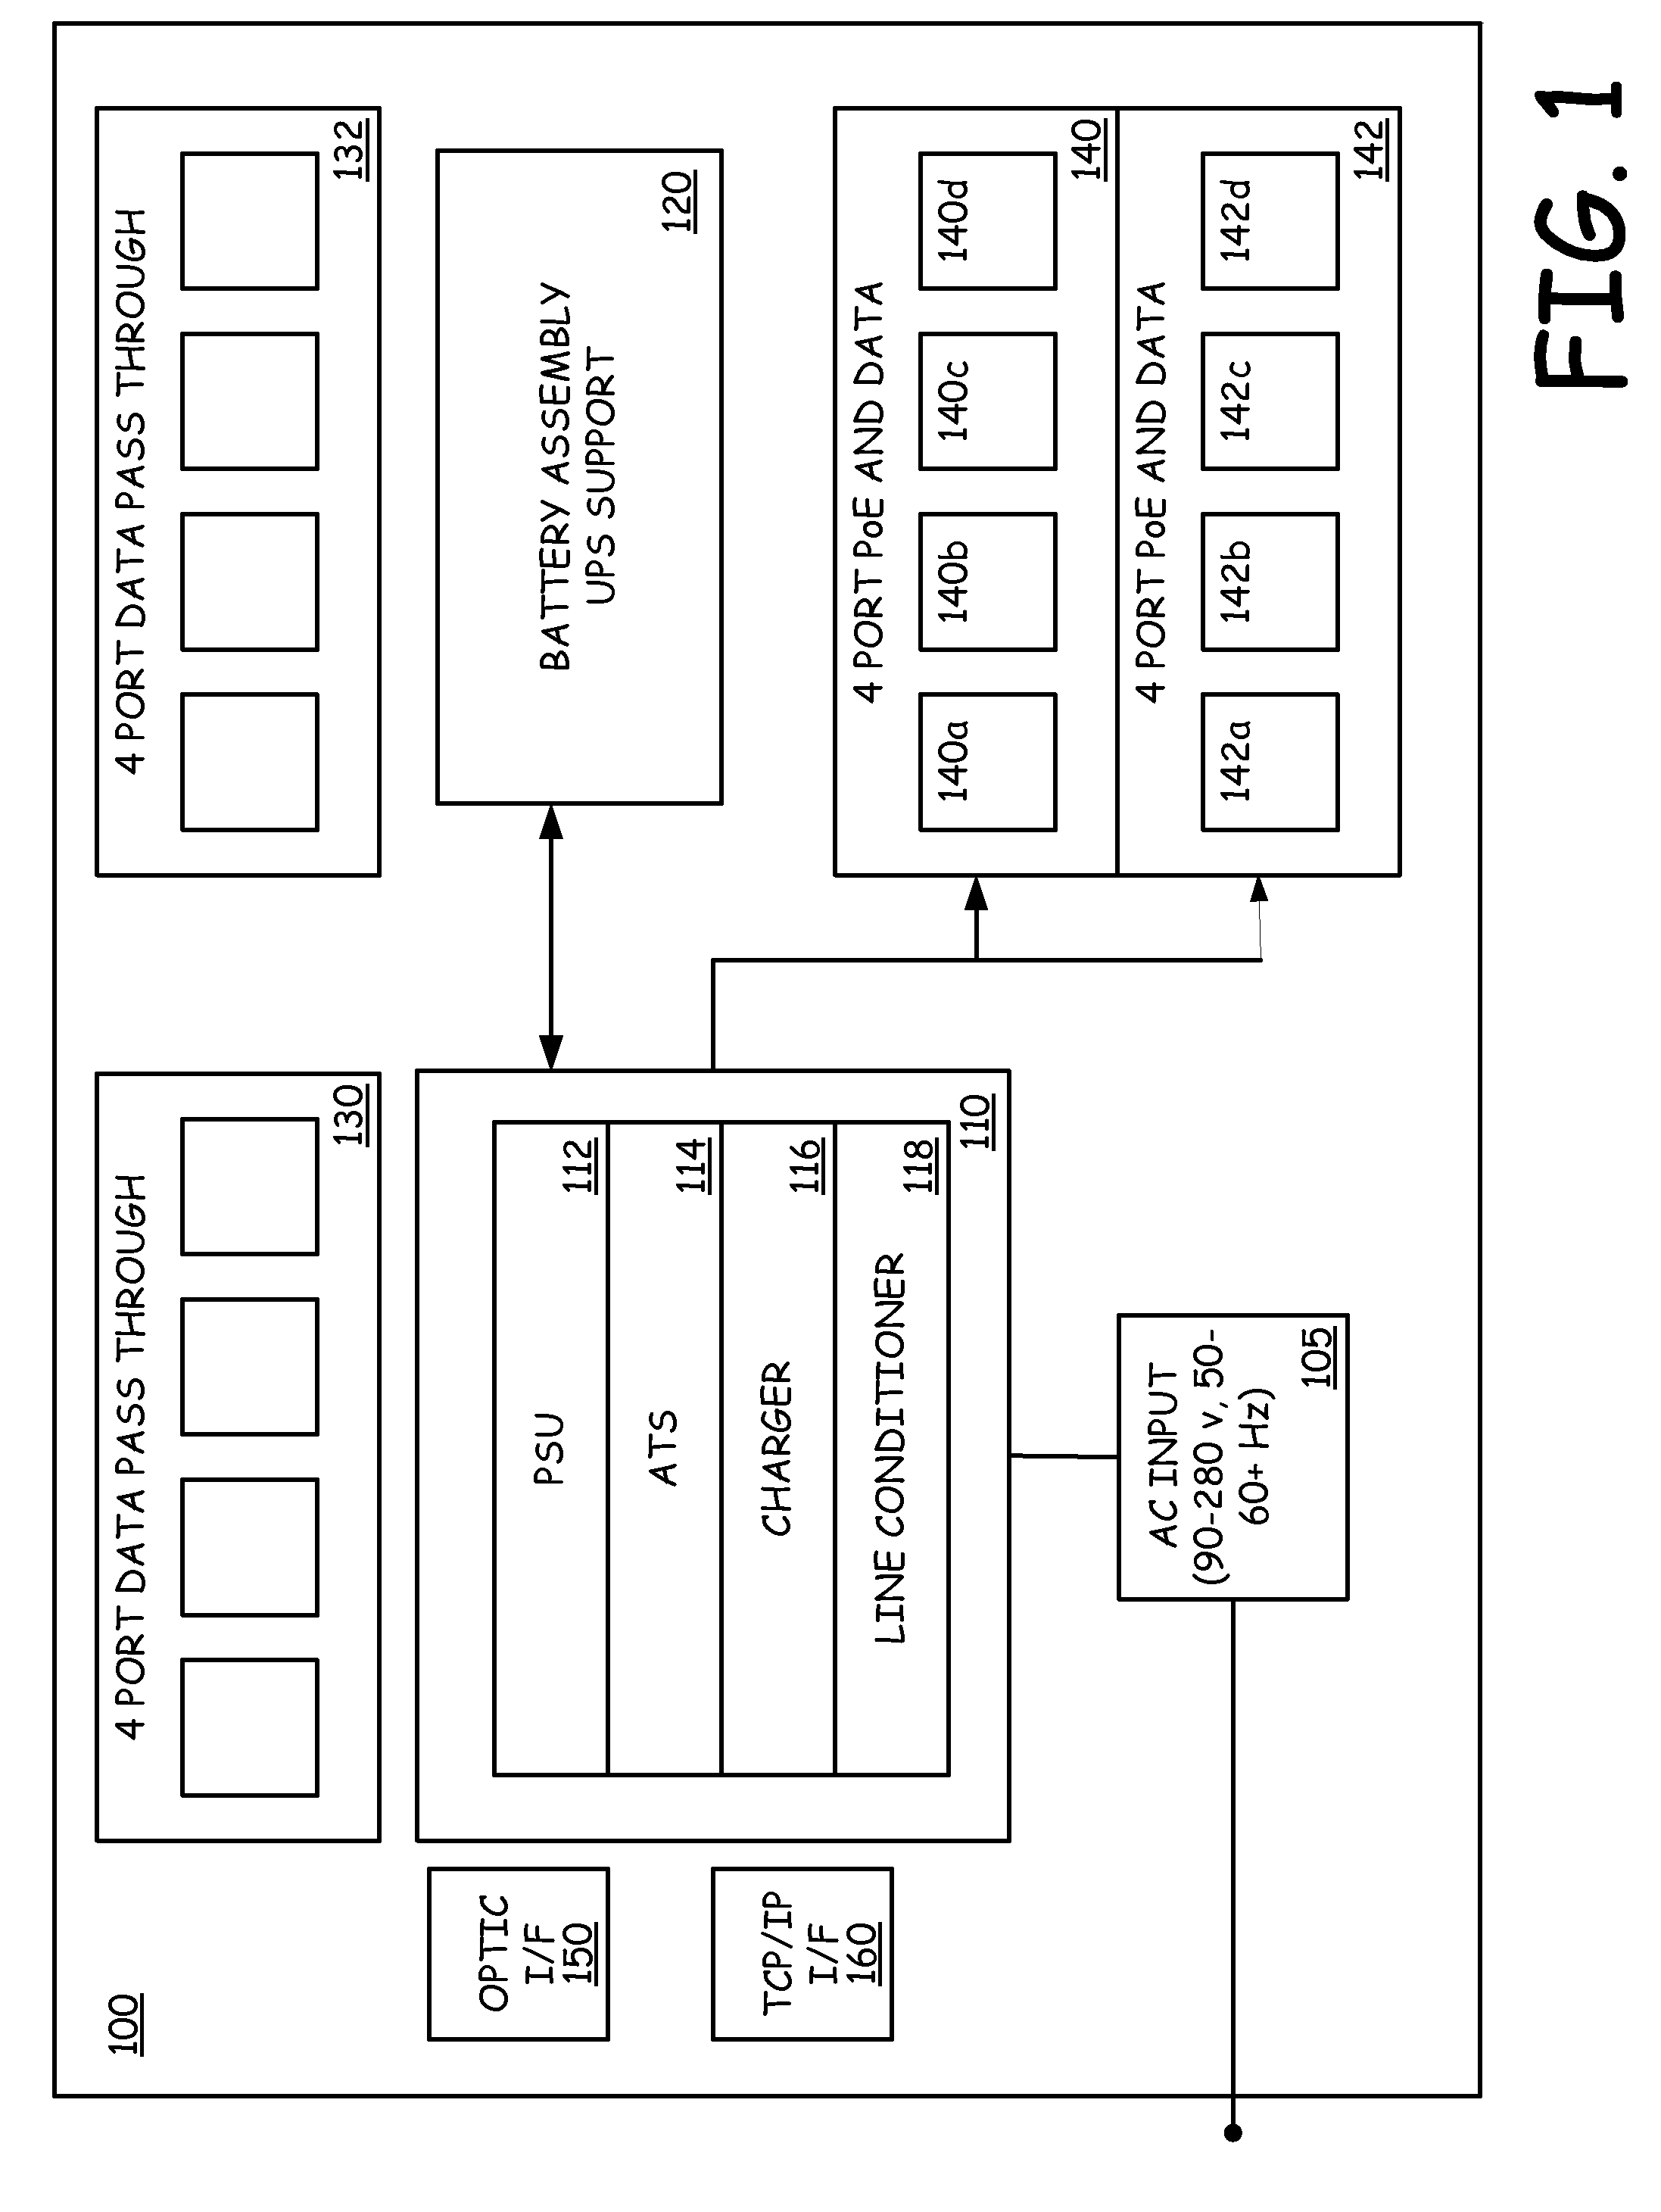 Multi-functional power supply with power over ethernet support, integrated monitoring and supplemental power source backup